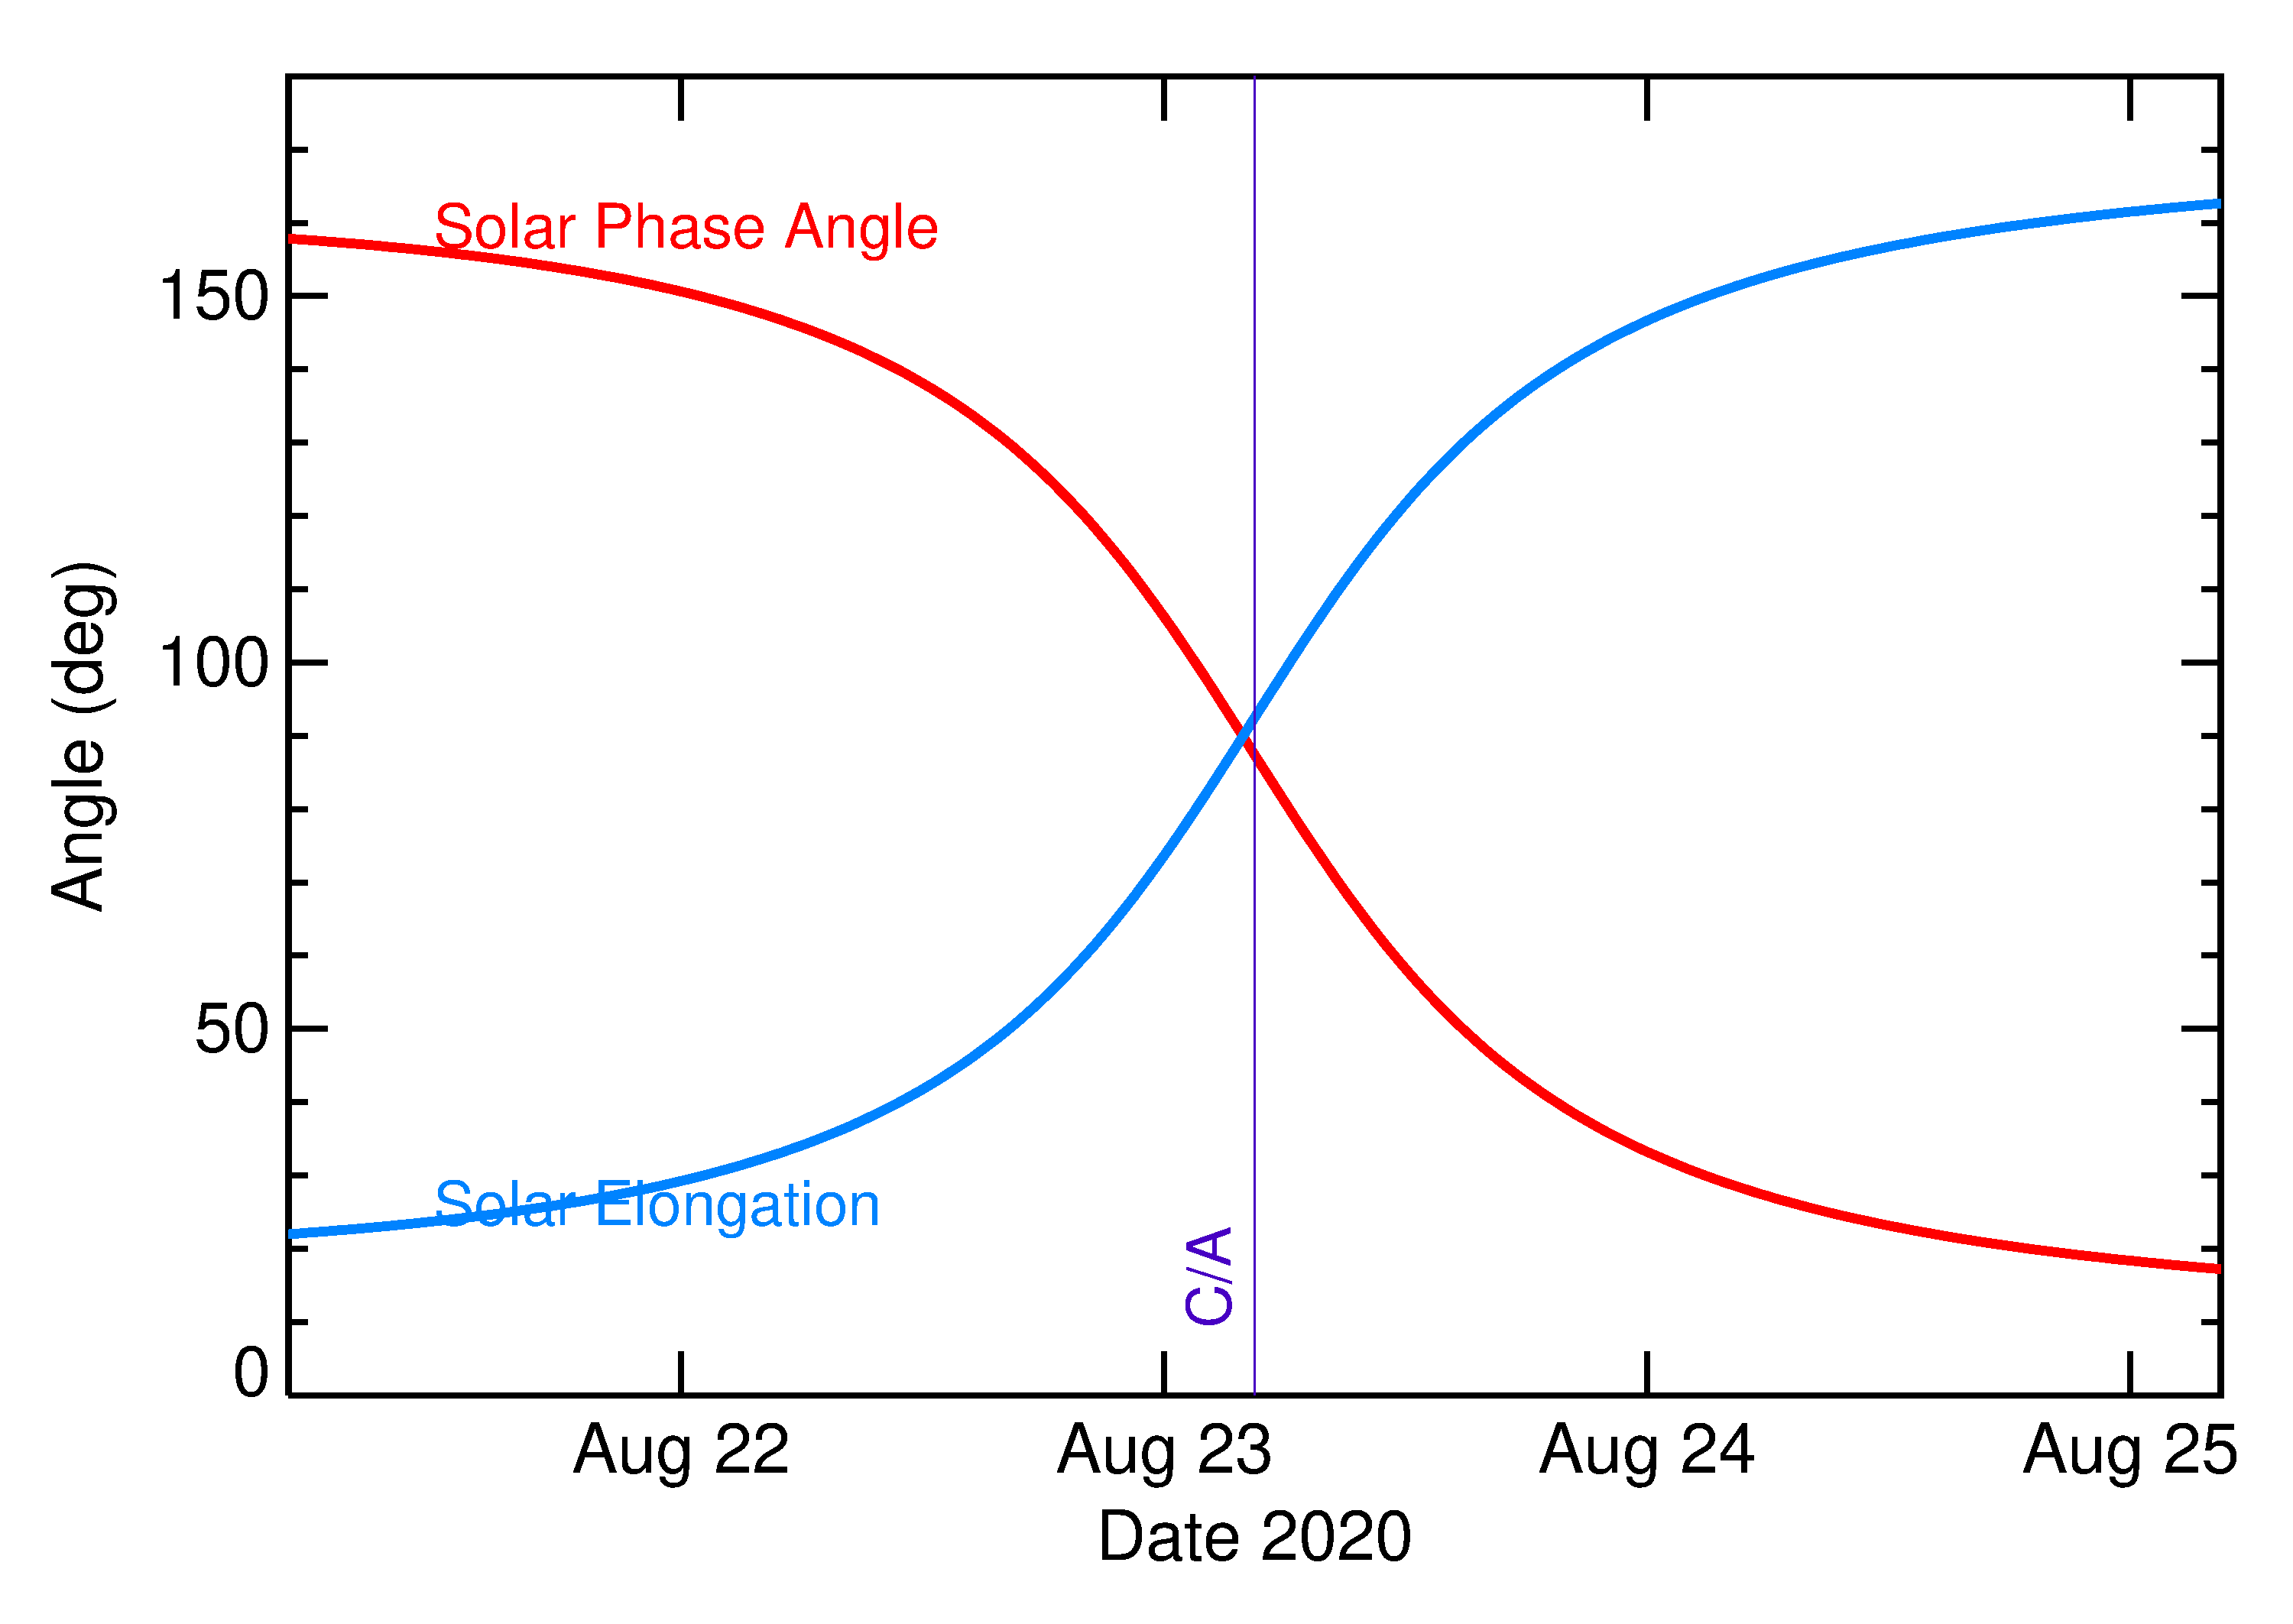 Solar Elongation and Solar Phase Angle of 2020 QR5 in the days around closest approach